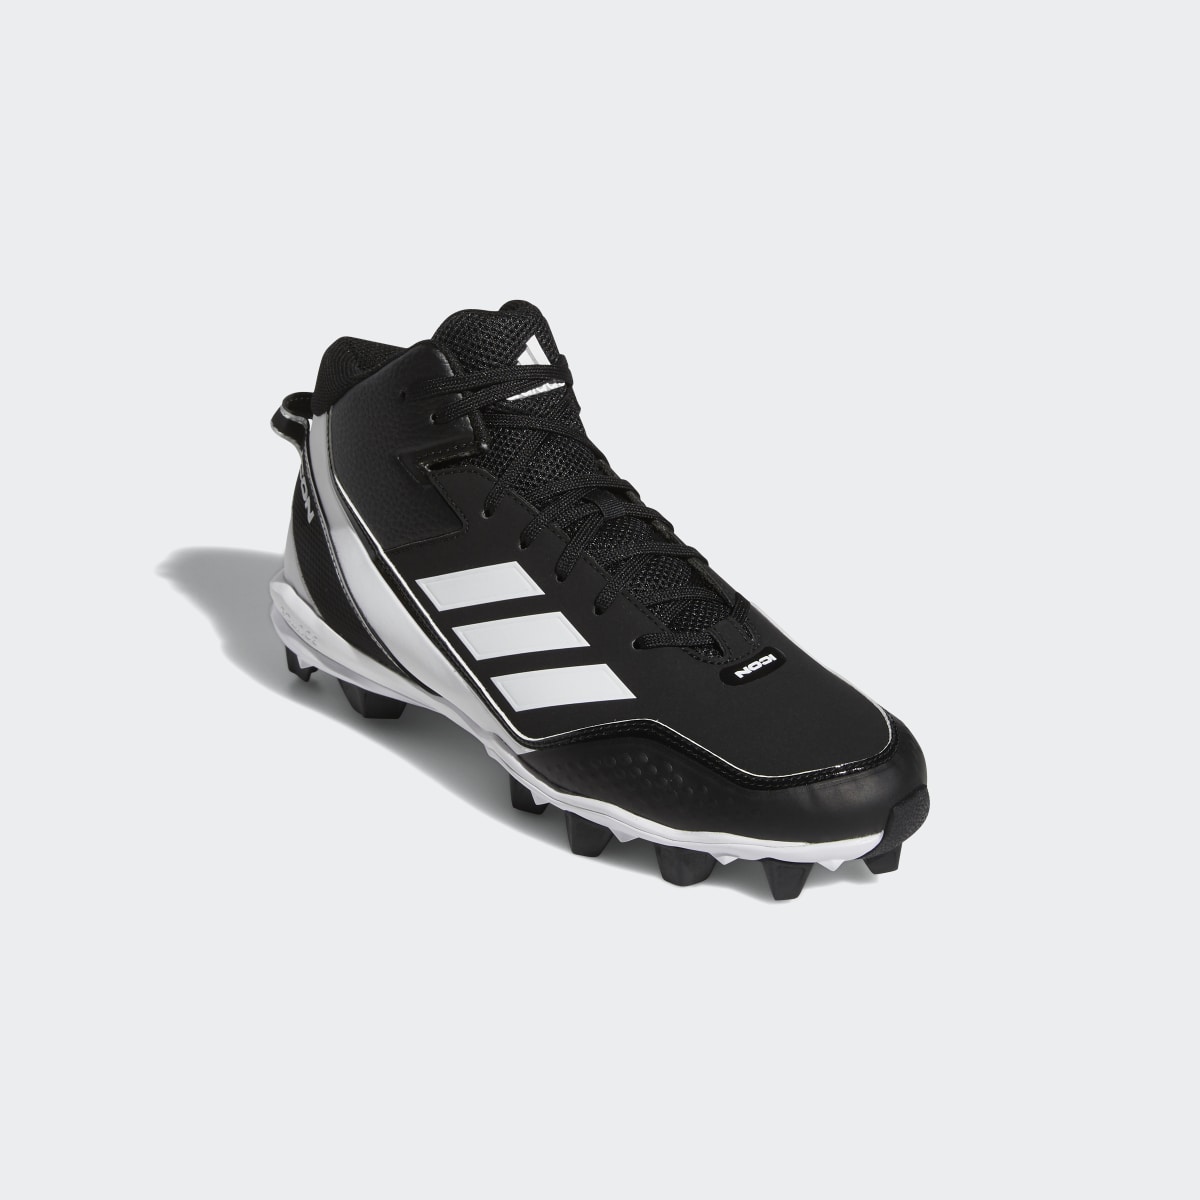 Adidas Icon 7 Mid MD Cleats. 5